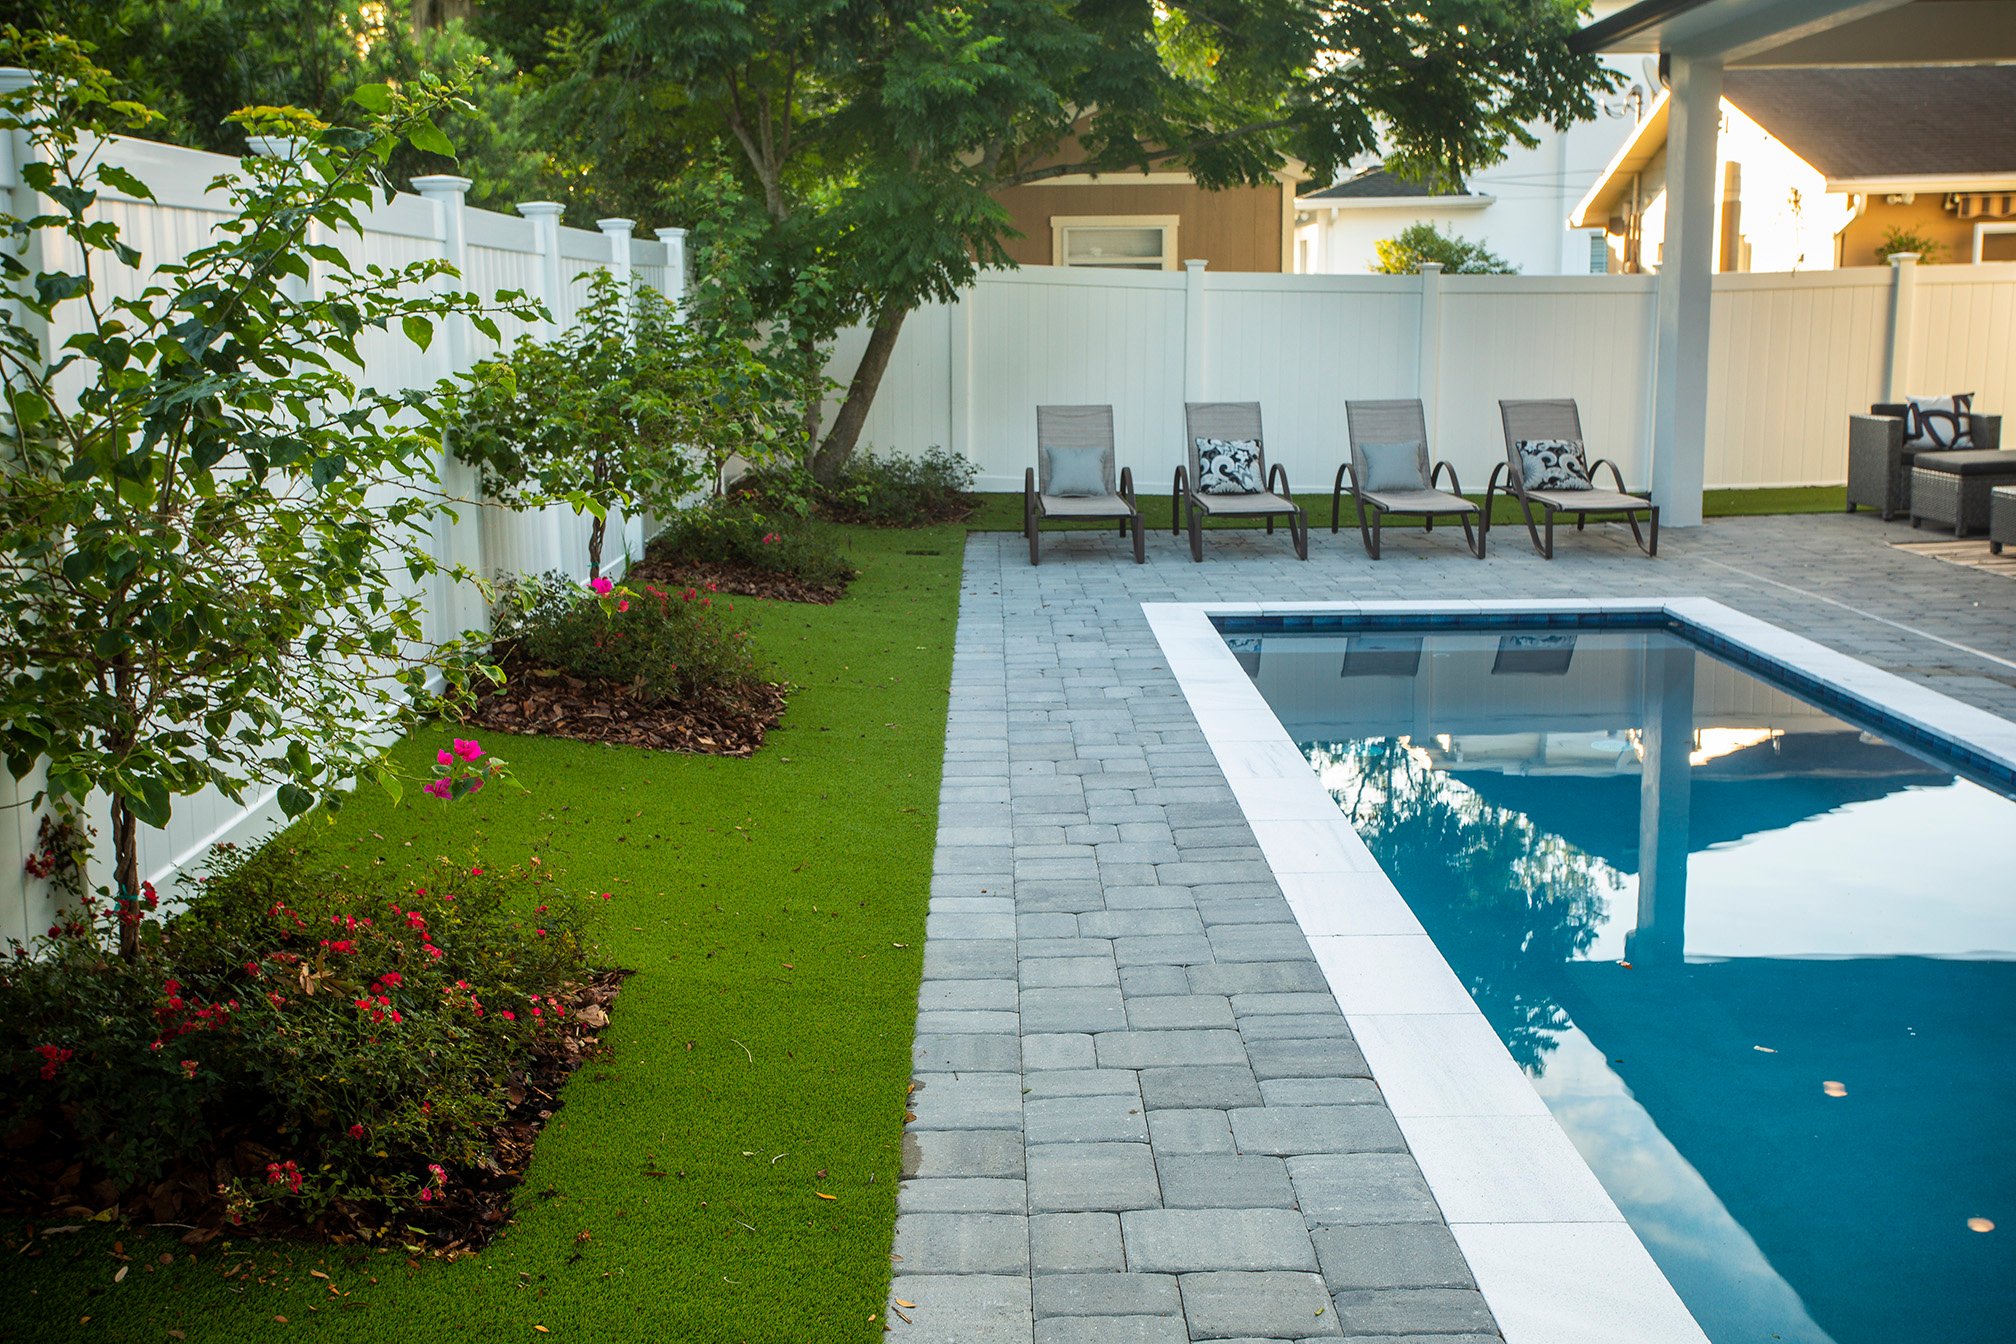  Pool Landscaping Plants Perfect For Orlando Fl - Tropical Plants For Around Pool Florida